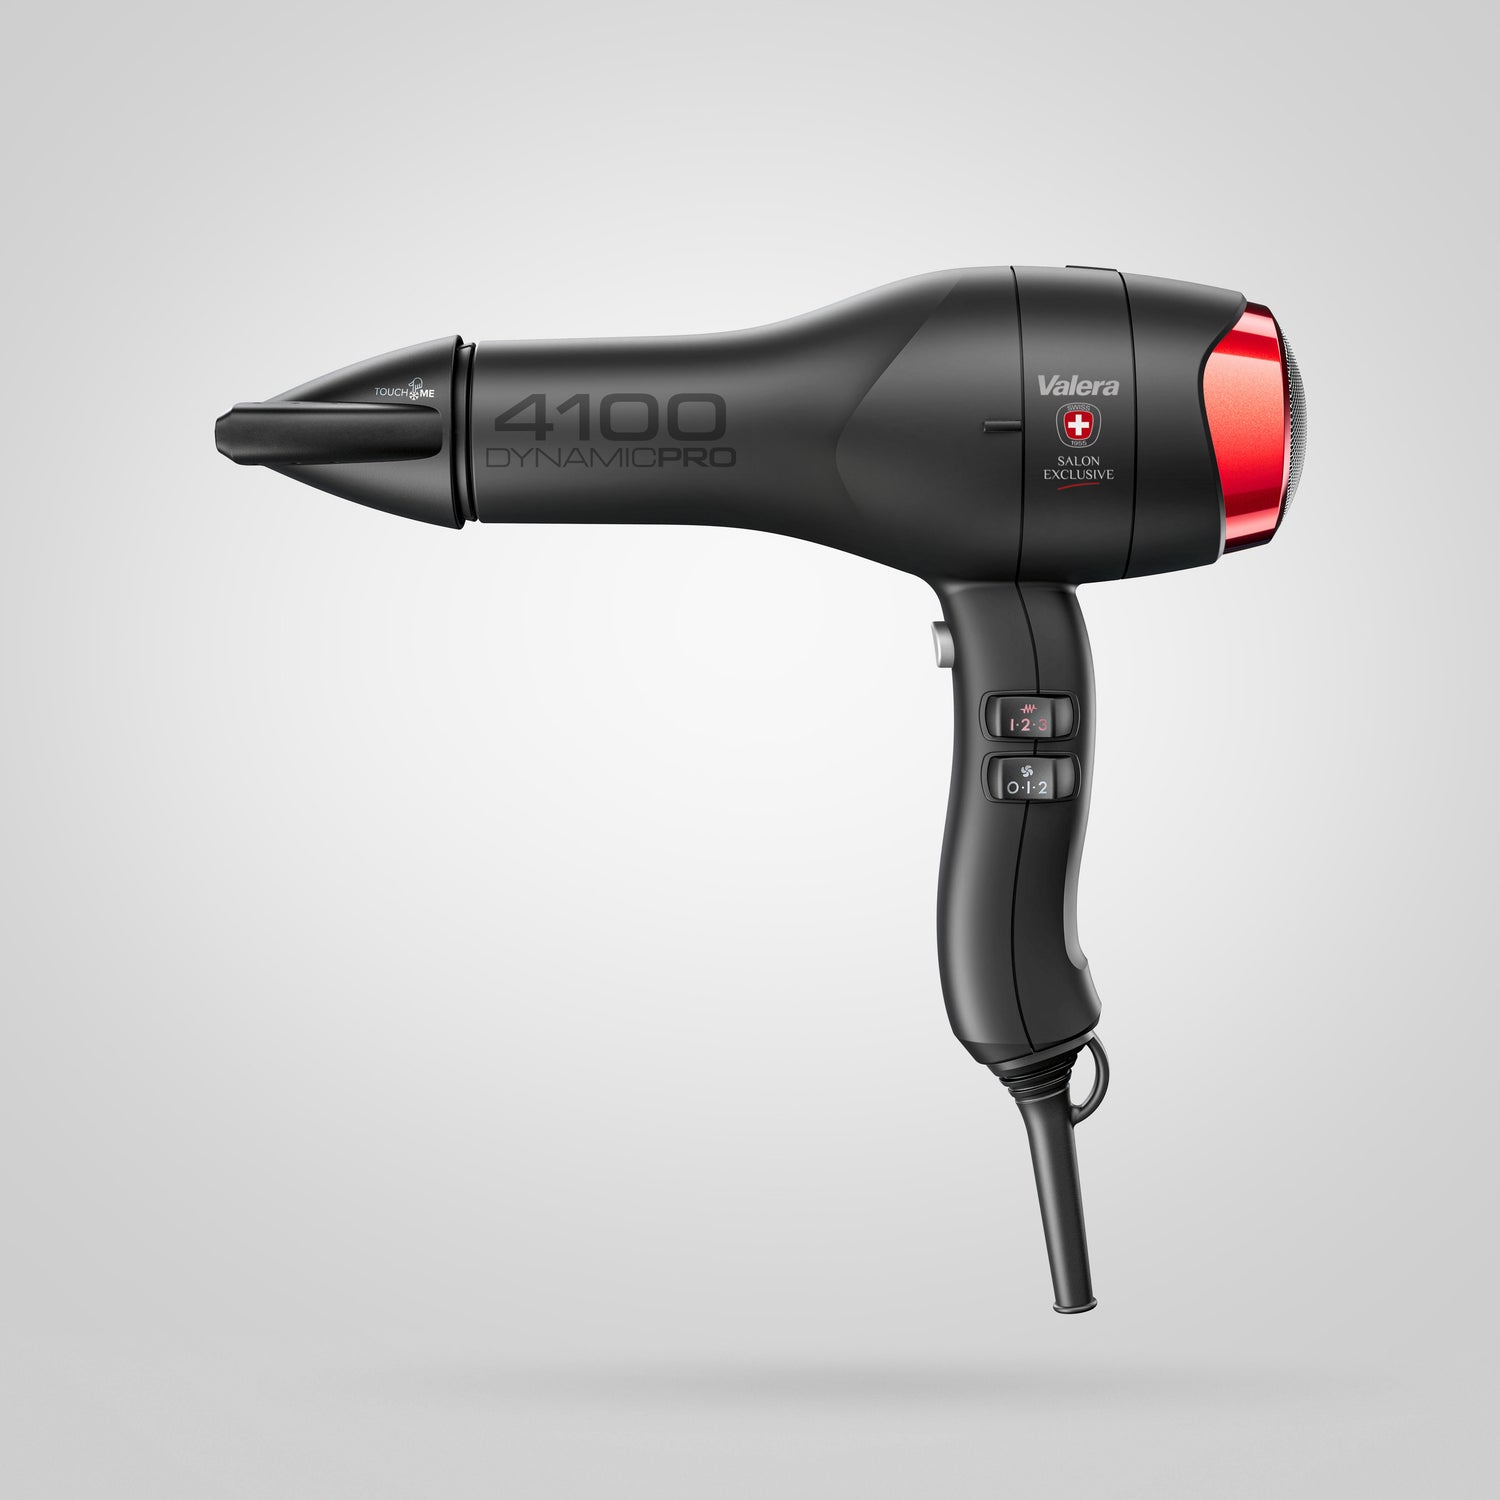 Dynamic Pro 4100 professional hairdryer